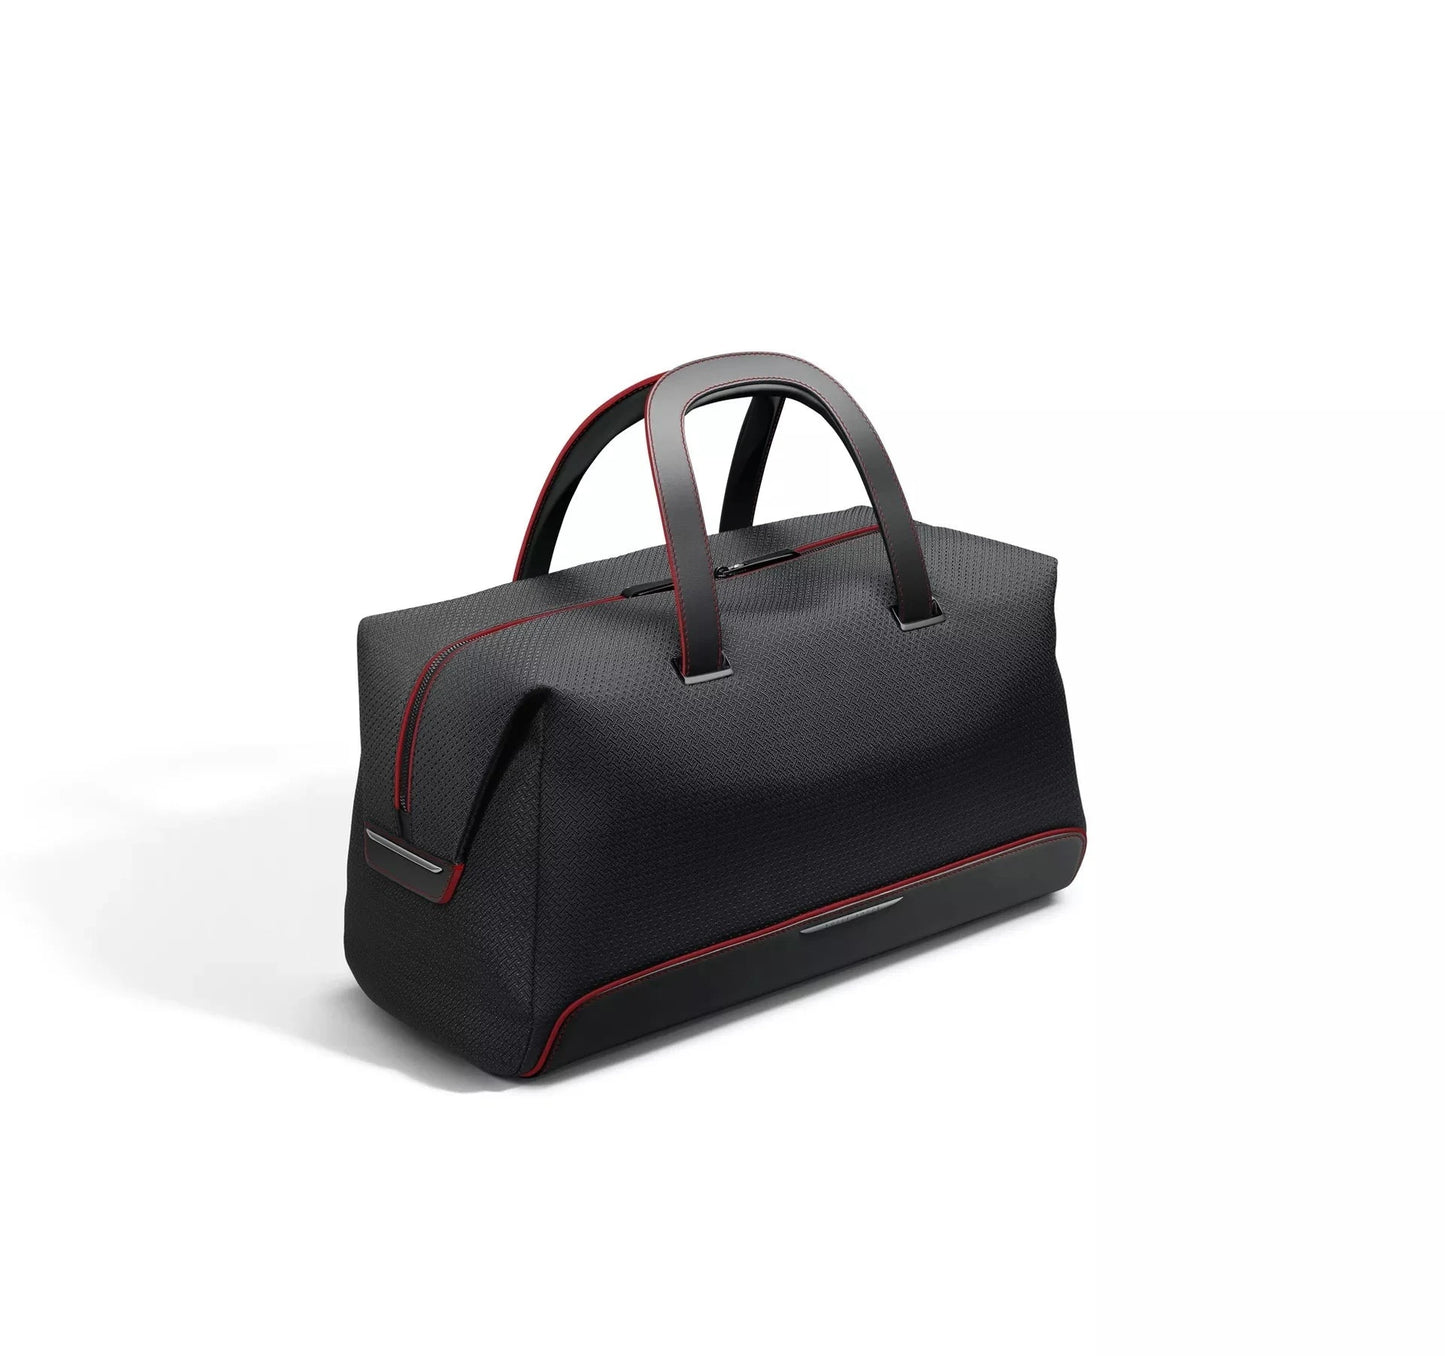 Rolls-Royce Black Badge Escapism Luggage Collection Understated